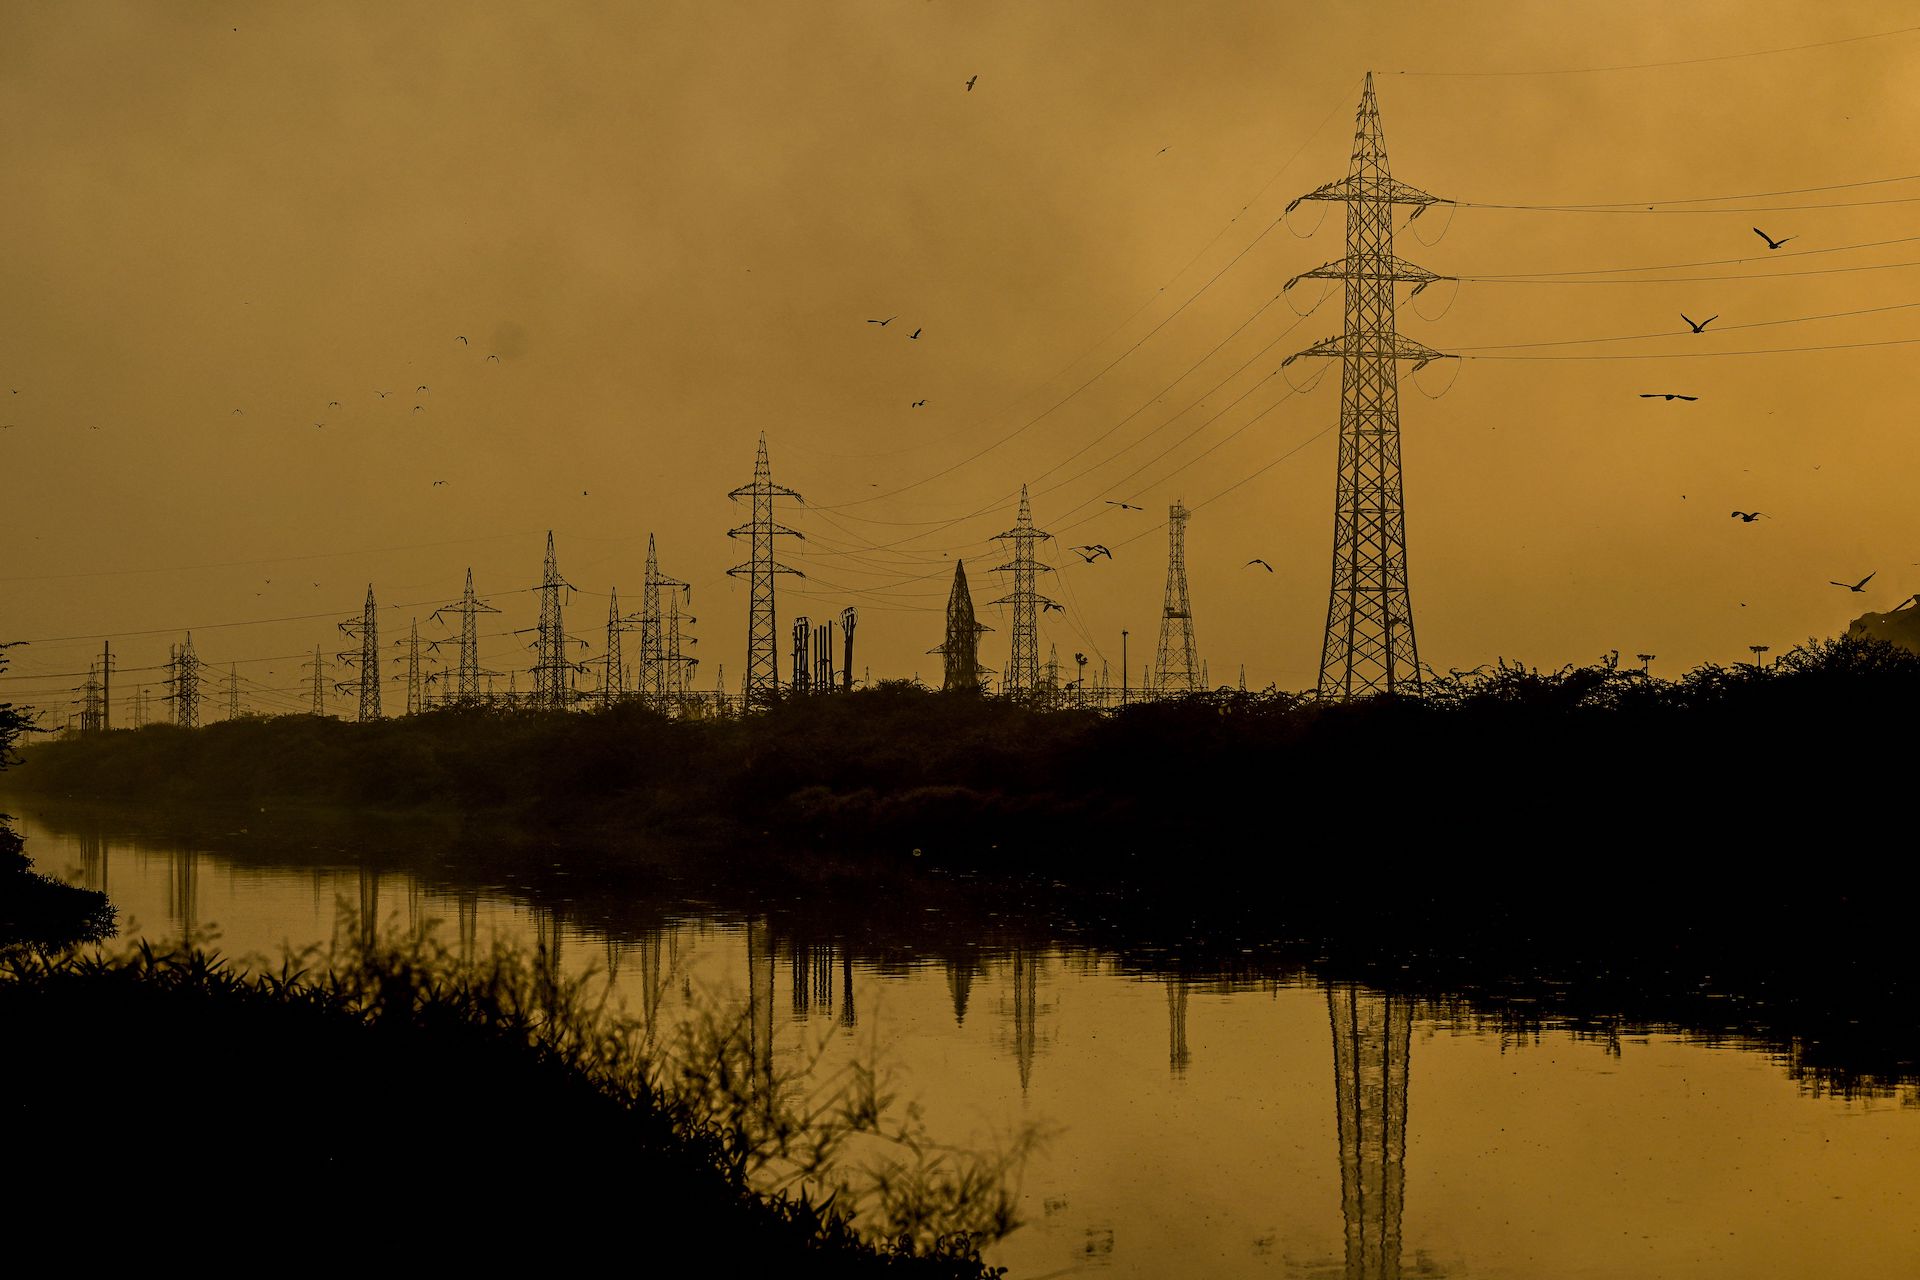 Suspected Chinese hackers are targeting India's power grid